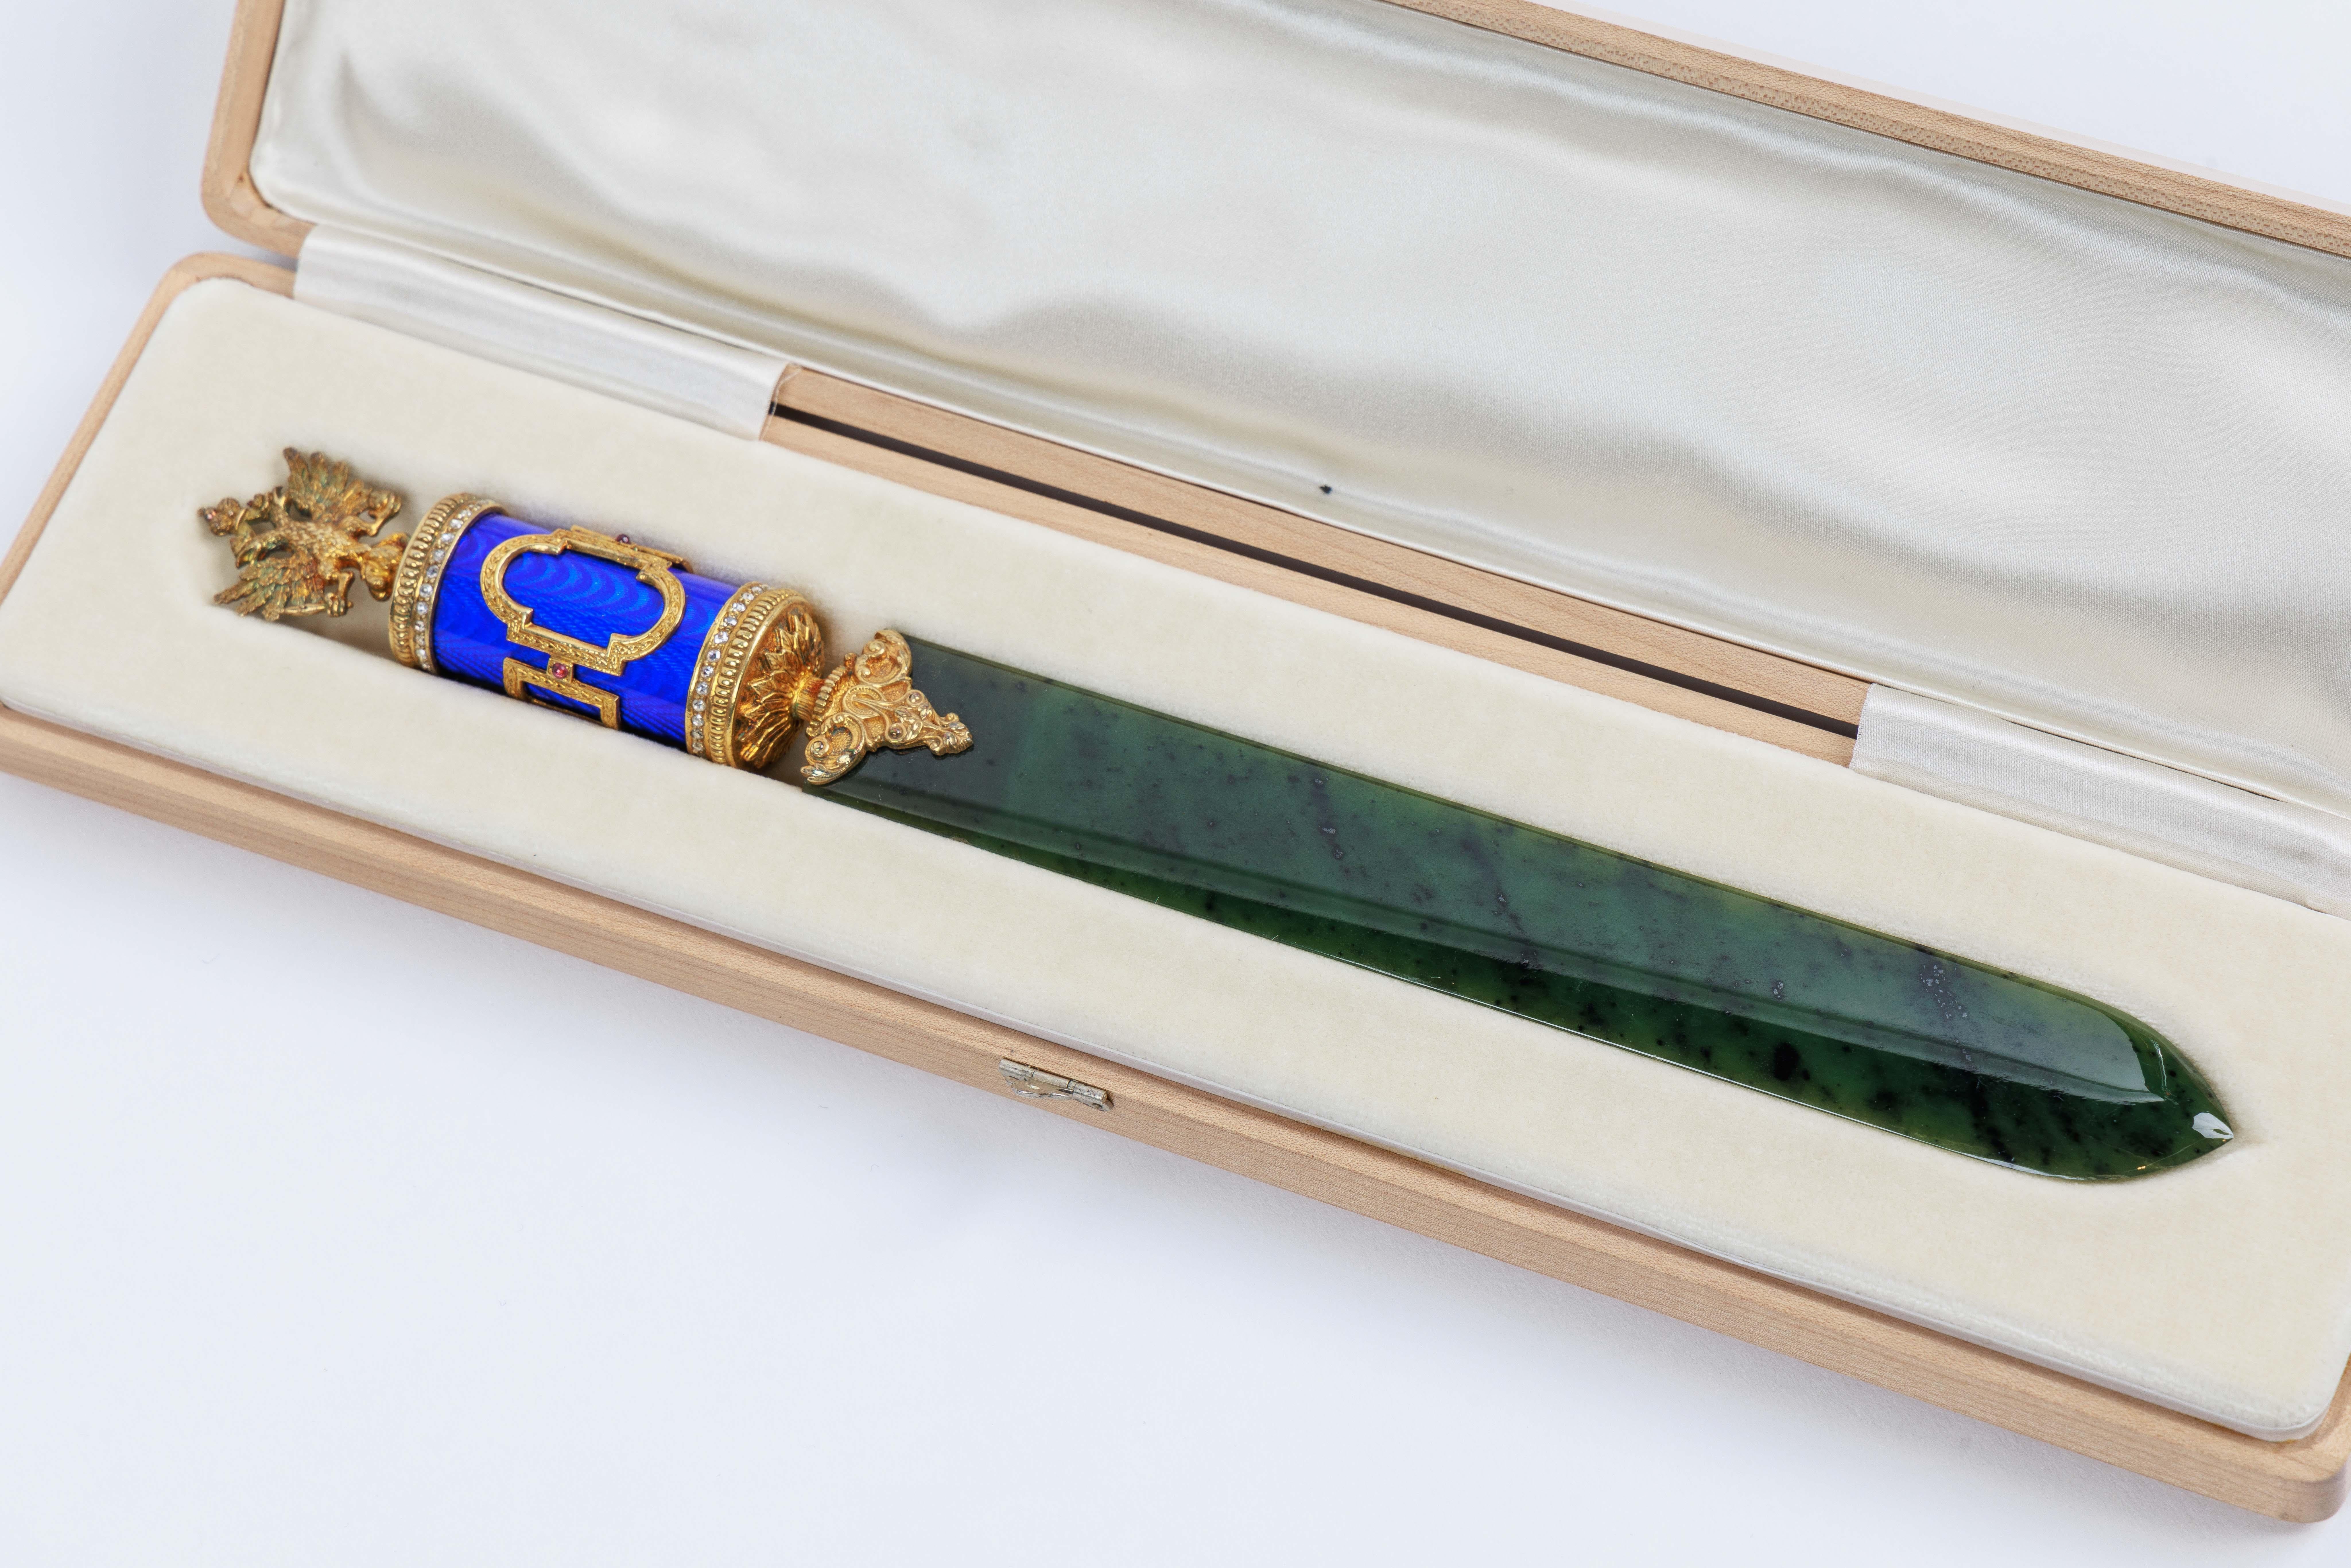 A Russian Silver-Gilt, Diamonds, Nephrite, and Blue Guilloche Enamel Letter Opener, with a Russian Double Eagle, in original fitted box.

Exquisite jewel like quality, in the Faberge style.

Measures 10